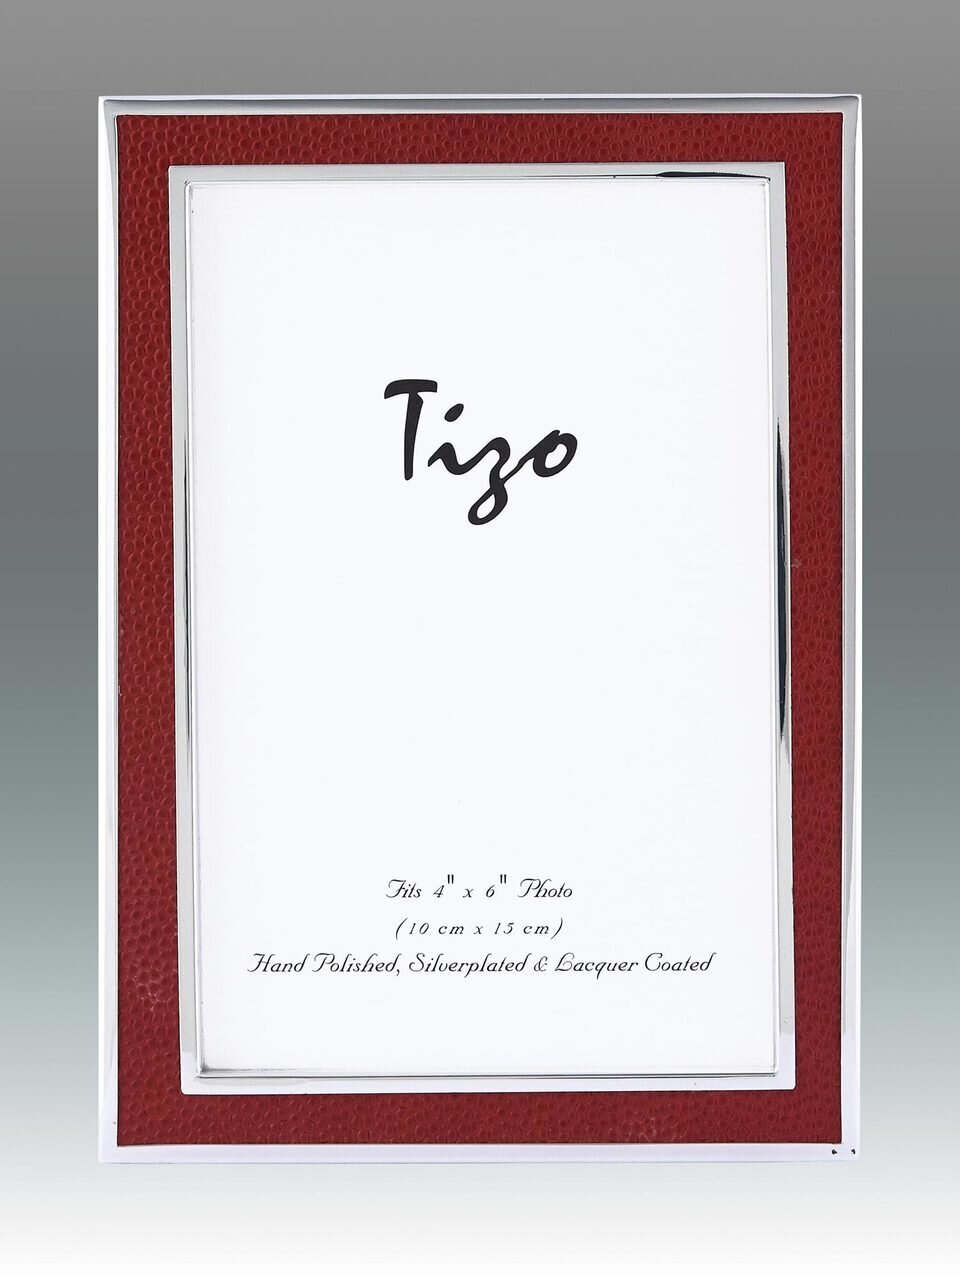 Tizo Shagreen Red & Silver-plated Picture Frame 4 x 6 Inch